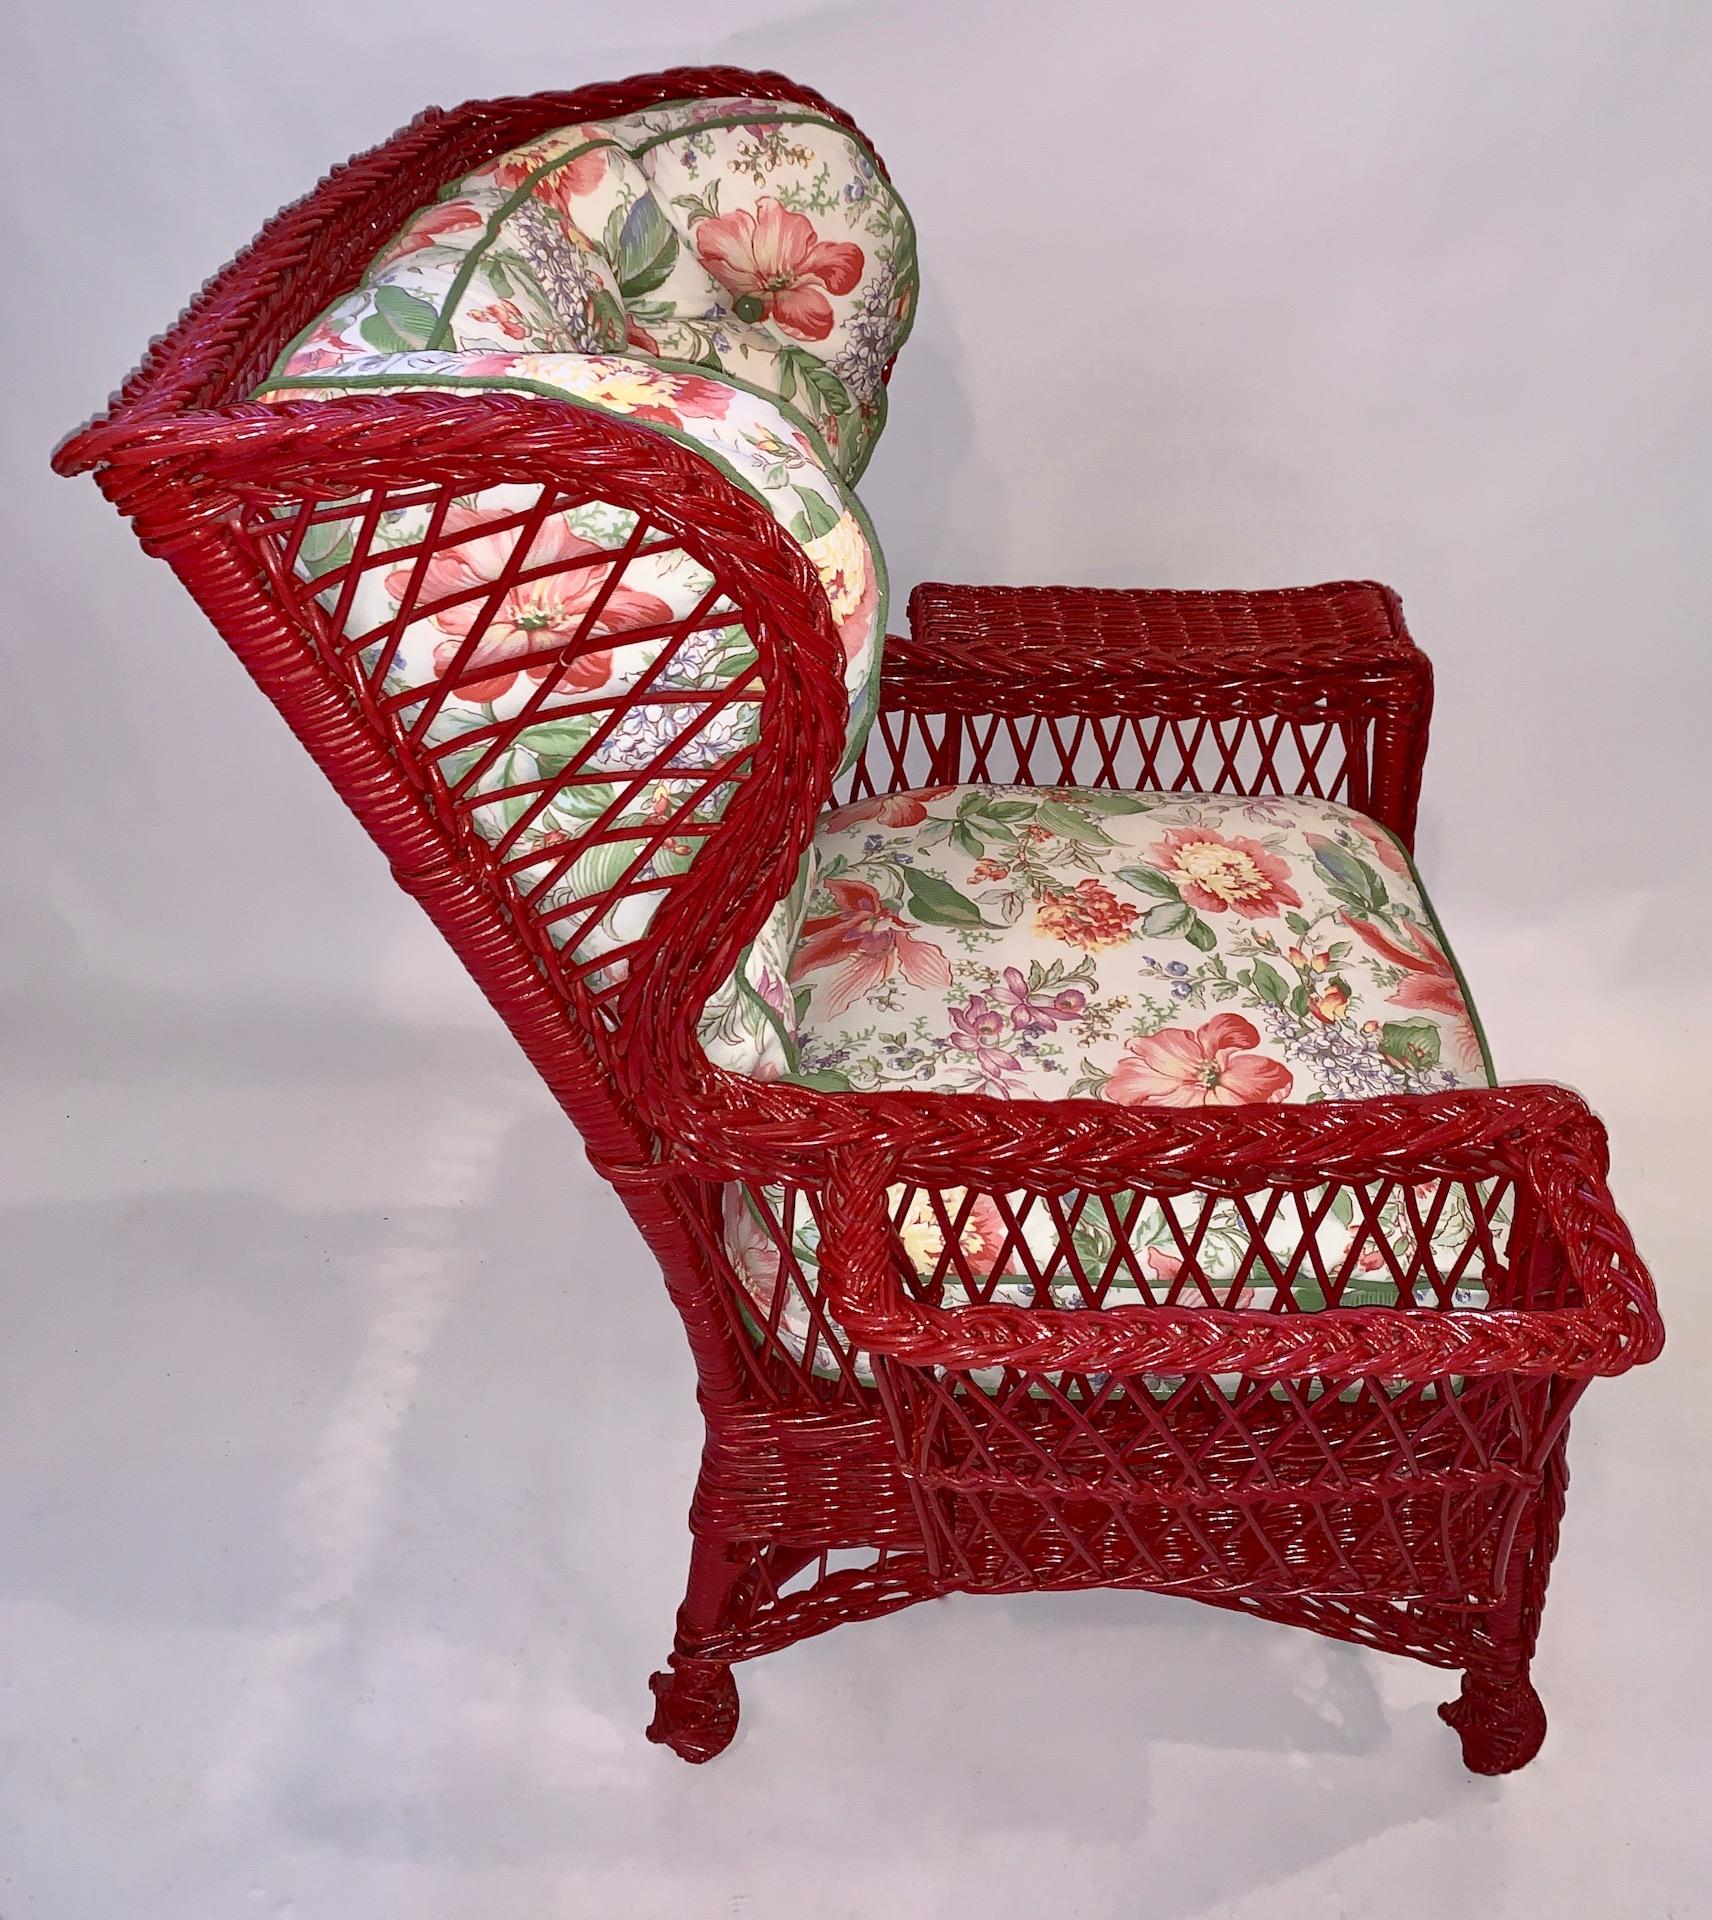 Woven Large Early 20th C. Bar Harbor Wing Back Chair with Magazine Pocket For Sale